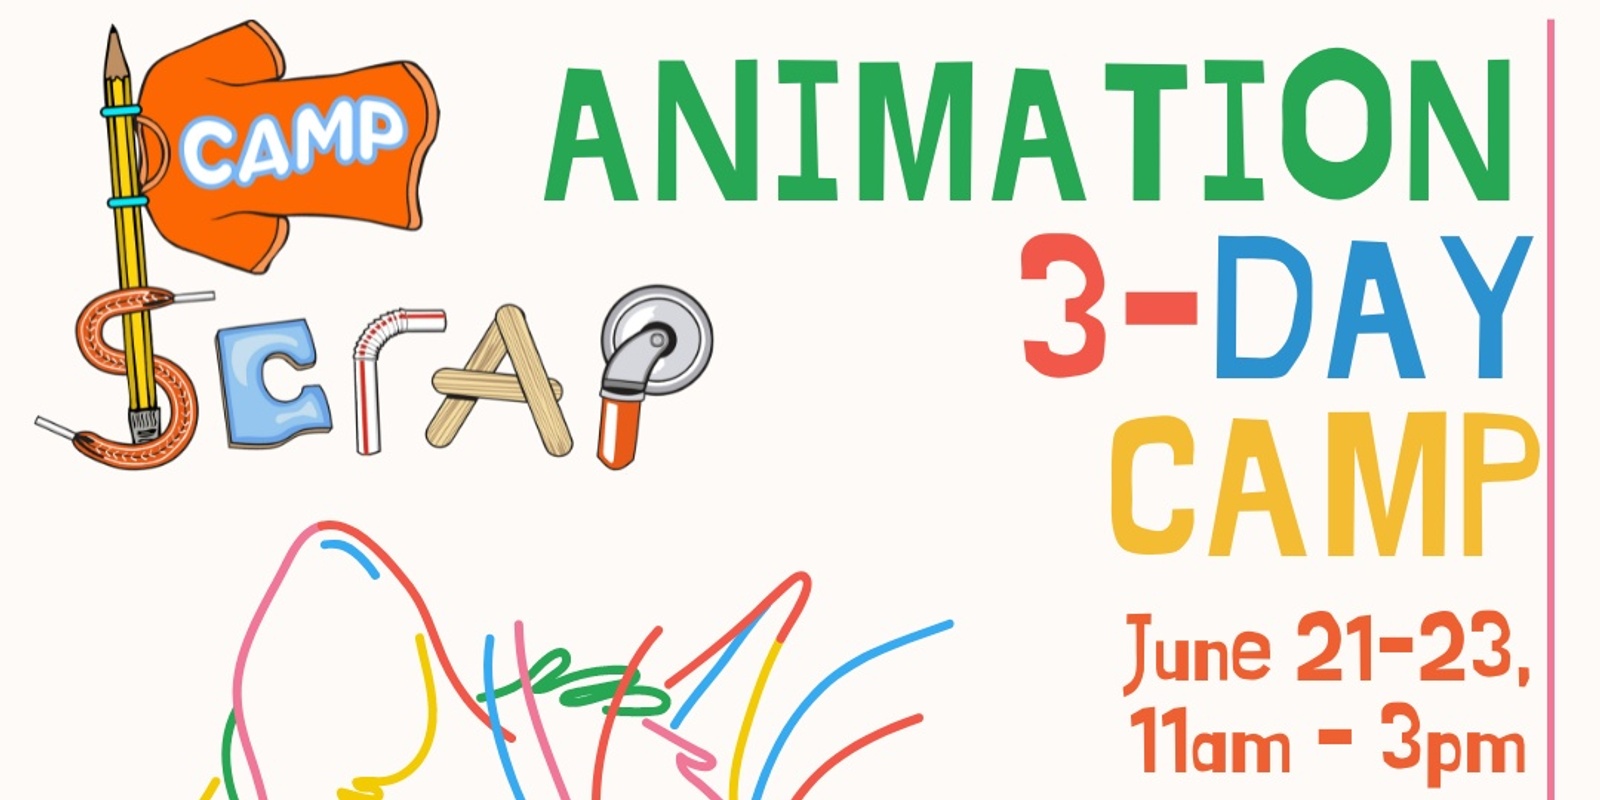 SCRAP Camp Summer Session #1: 3-Day Animation Camp (June 21-23)